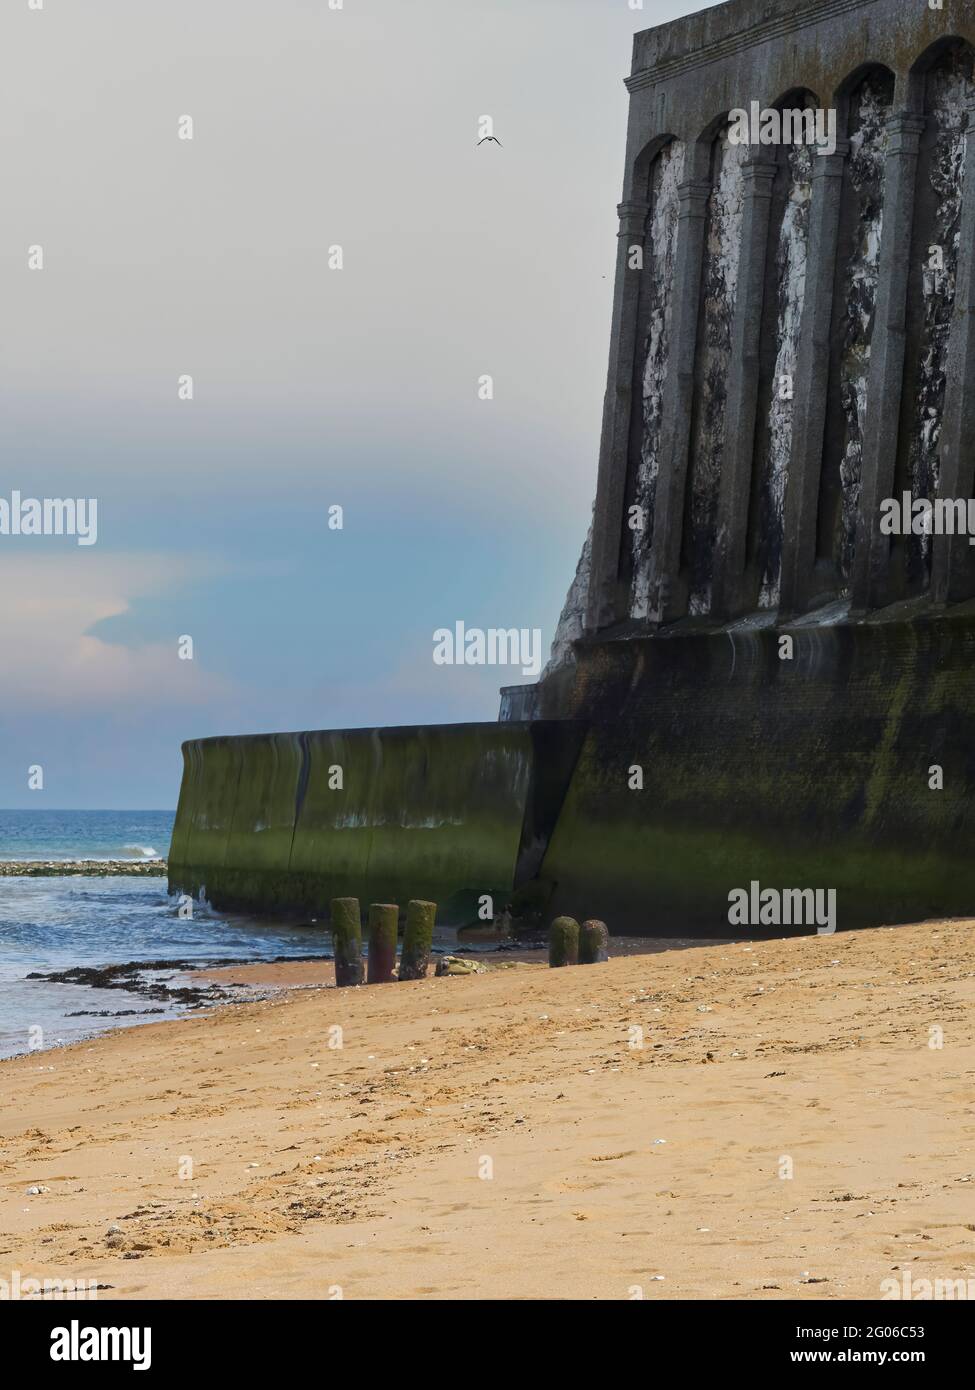 A view along a golden sandy beach to some colossal, cyclopean pillars embedded in a chalk cliff with a blue sky bearing a soaring bird behind. Stock Photo